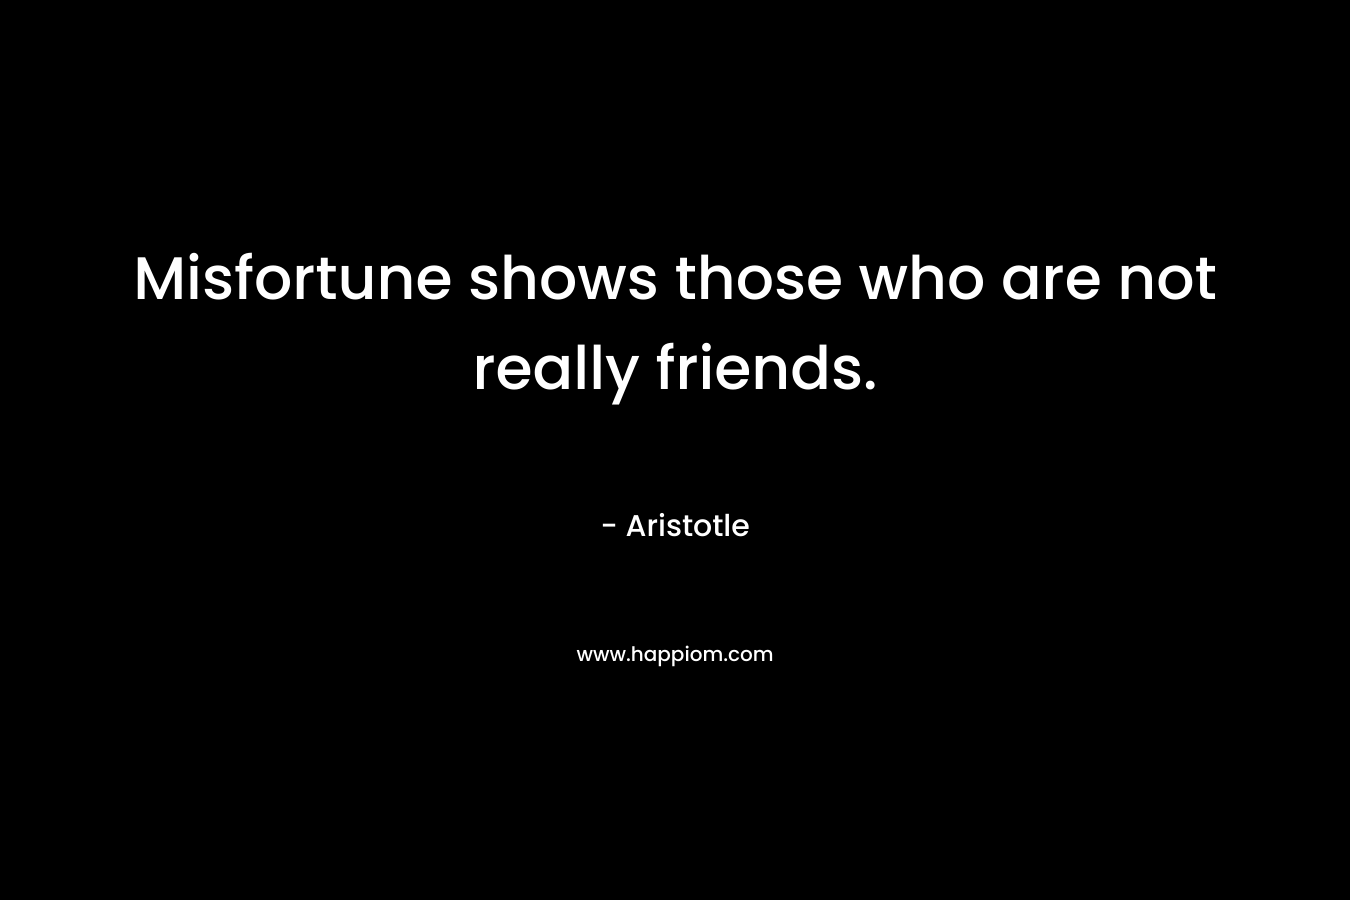 Misfortune shows those who are not really friends. – Aristotle